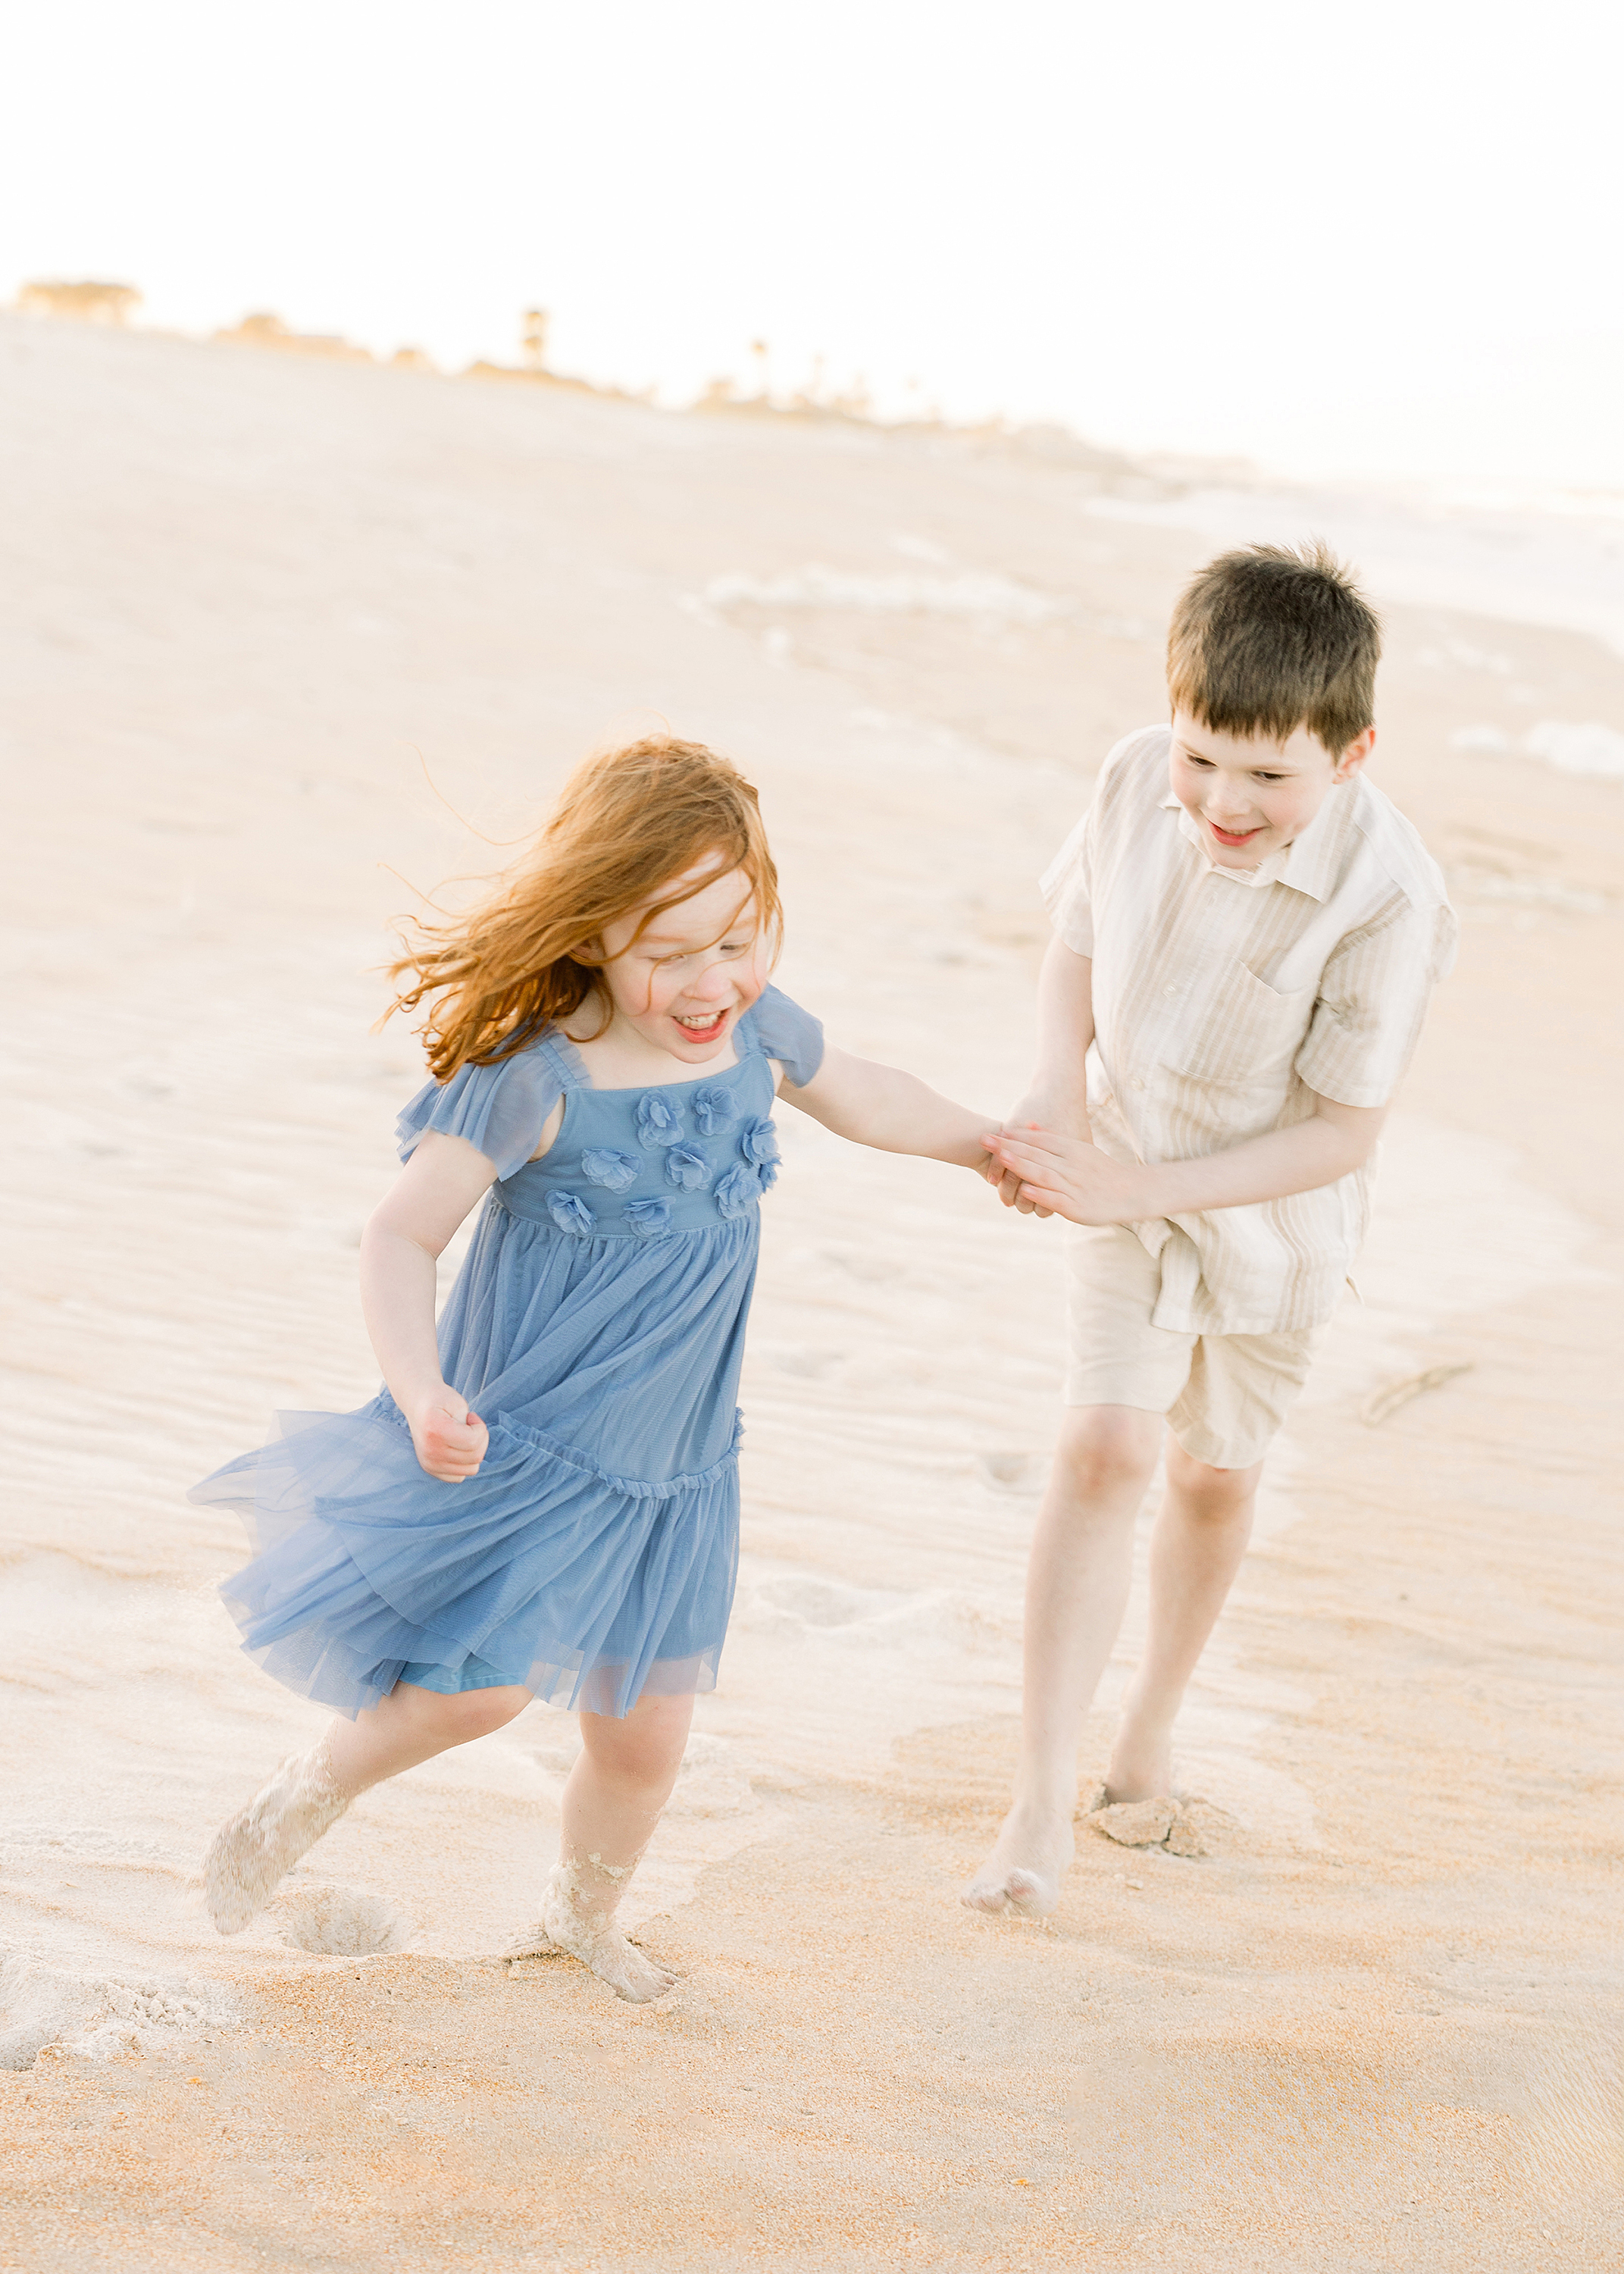 Two siblings play together on the sand at sunset.